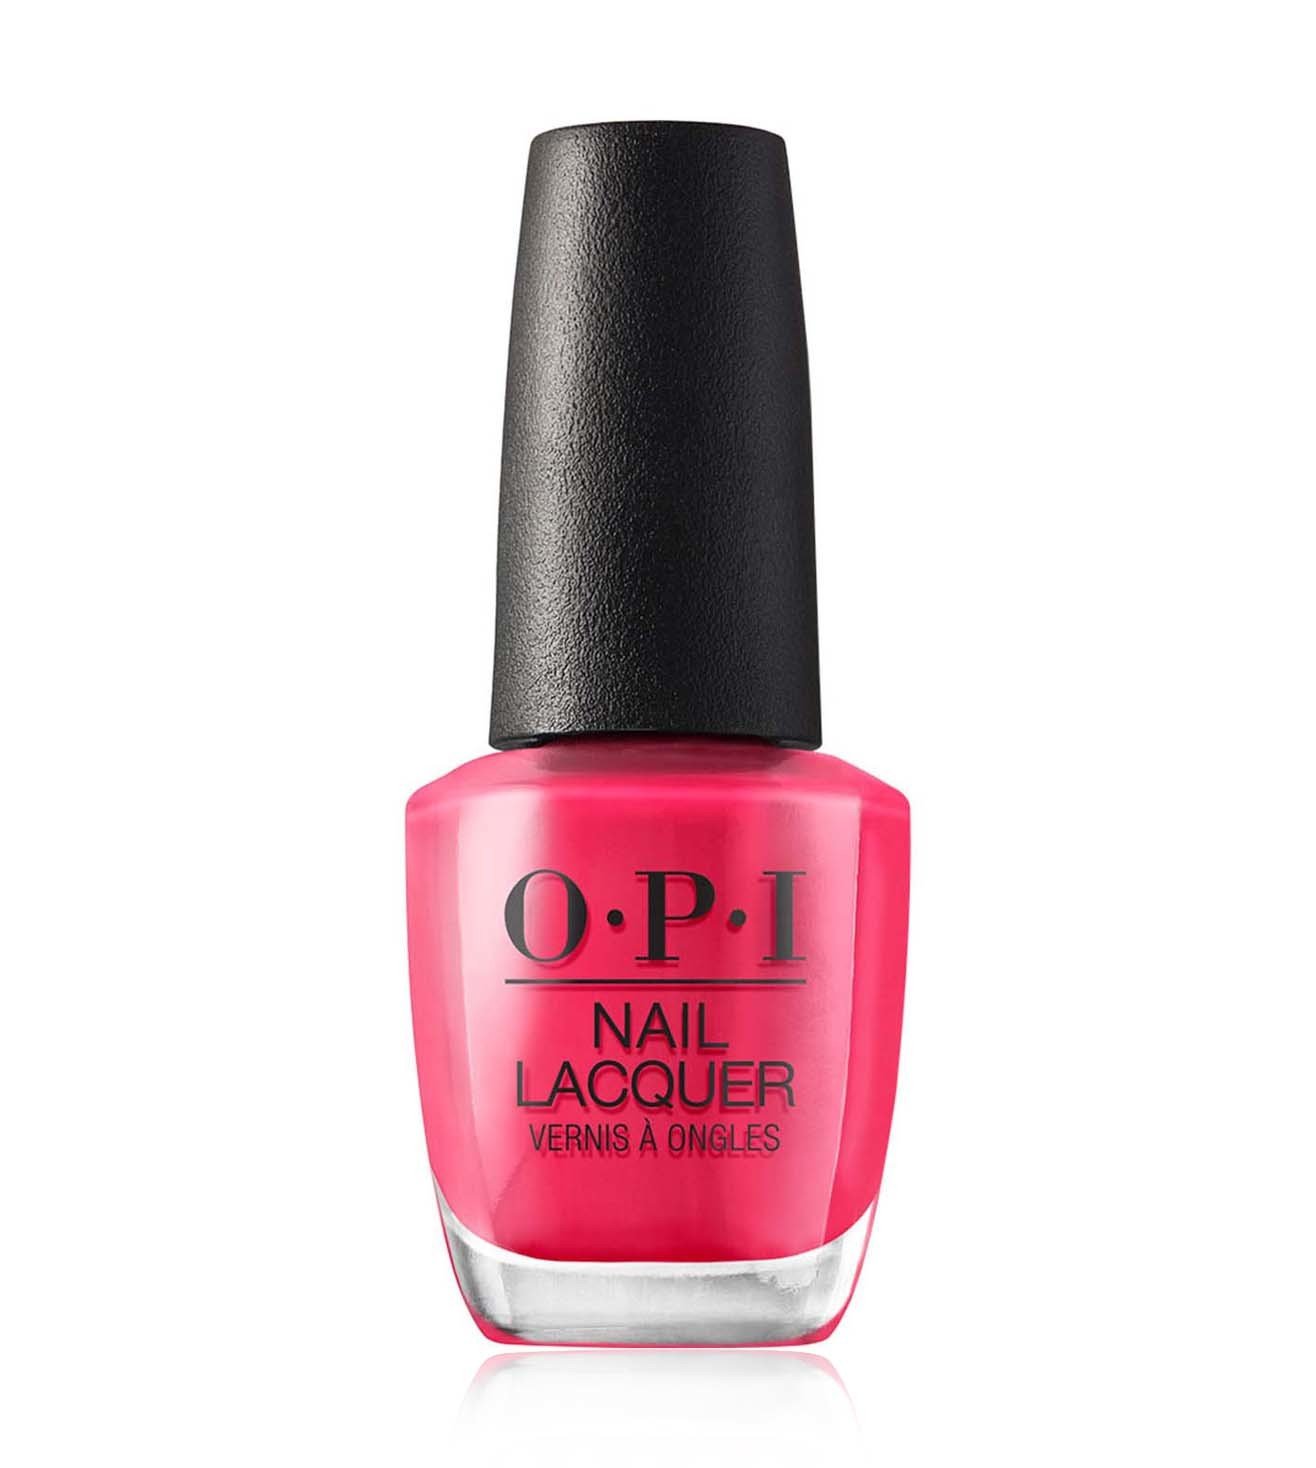 OPI Brazil Collection S/S 2014 Nail Polishes: Review and Swatches | Pretty  nails, Nail colors, Nail colors winter